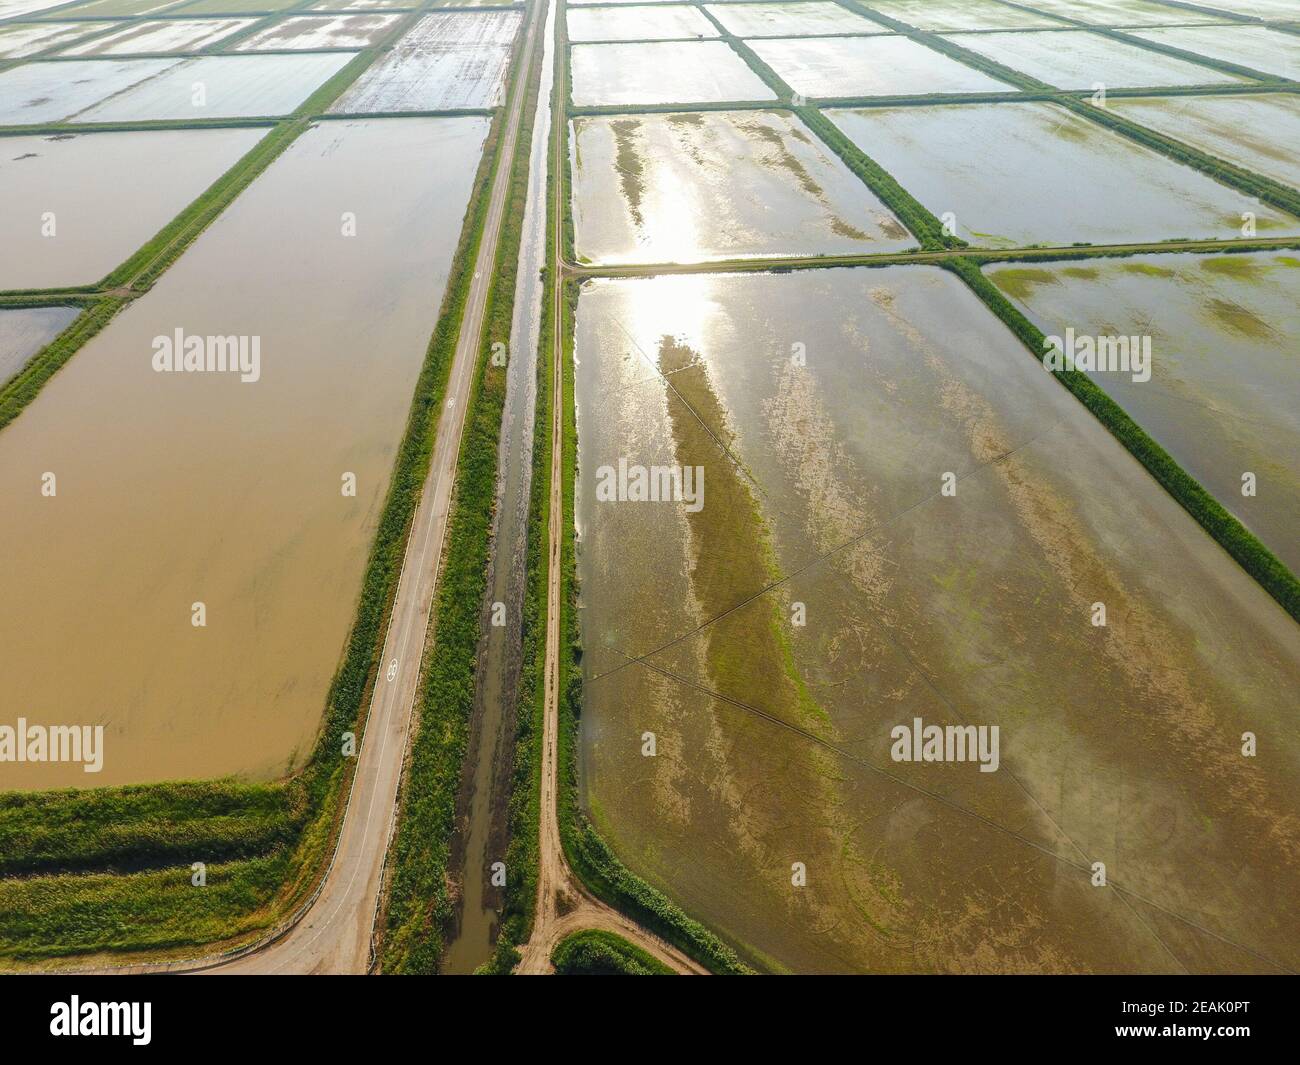 The rice fields are flooded with water. Flooded rice paddies. Agronomic methods of growing rice in the fields. Stock Photo